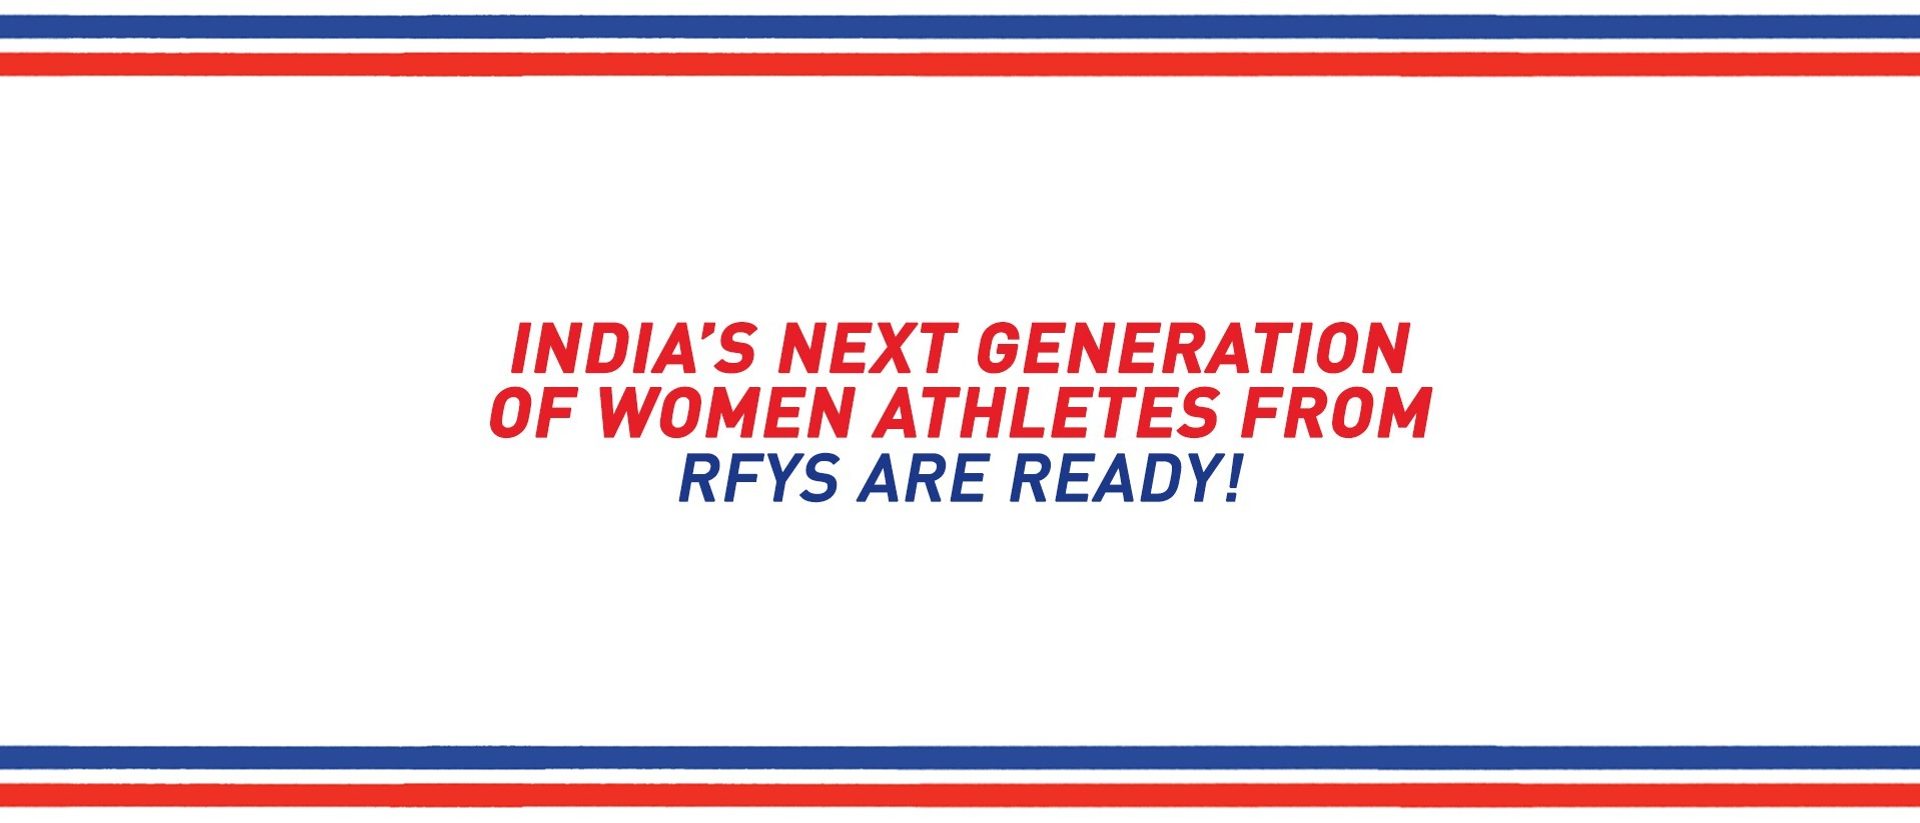 India’s Next Generation of Women athletes from RFYS are ready!